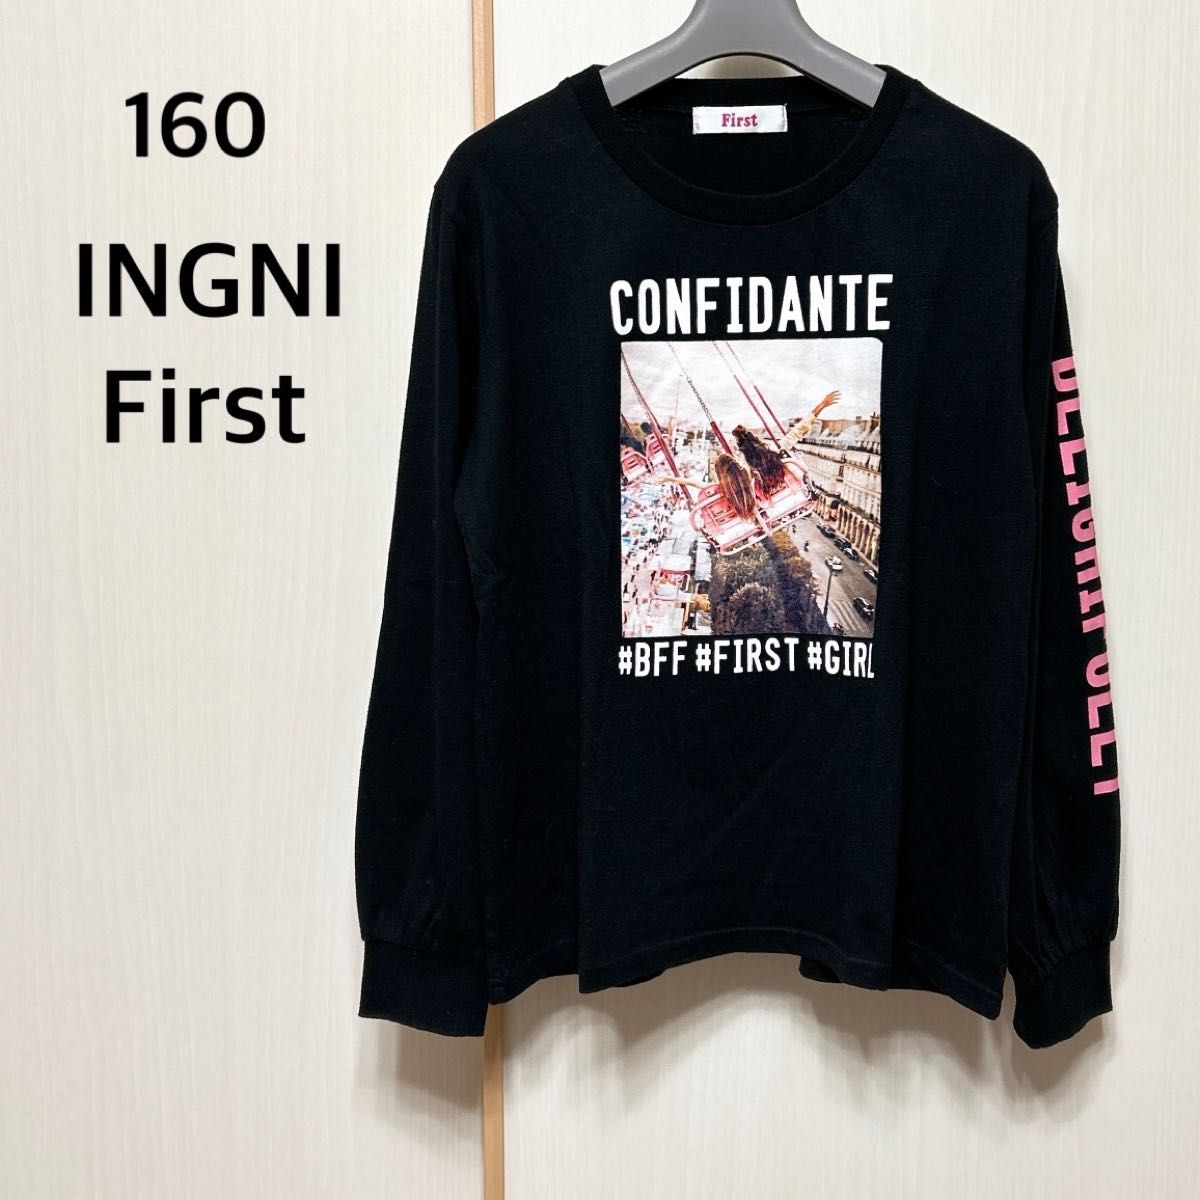 INGNI First 長袖 Tシャツ ロンＴ